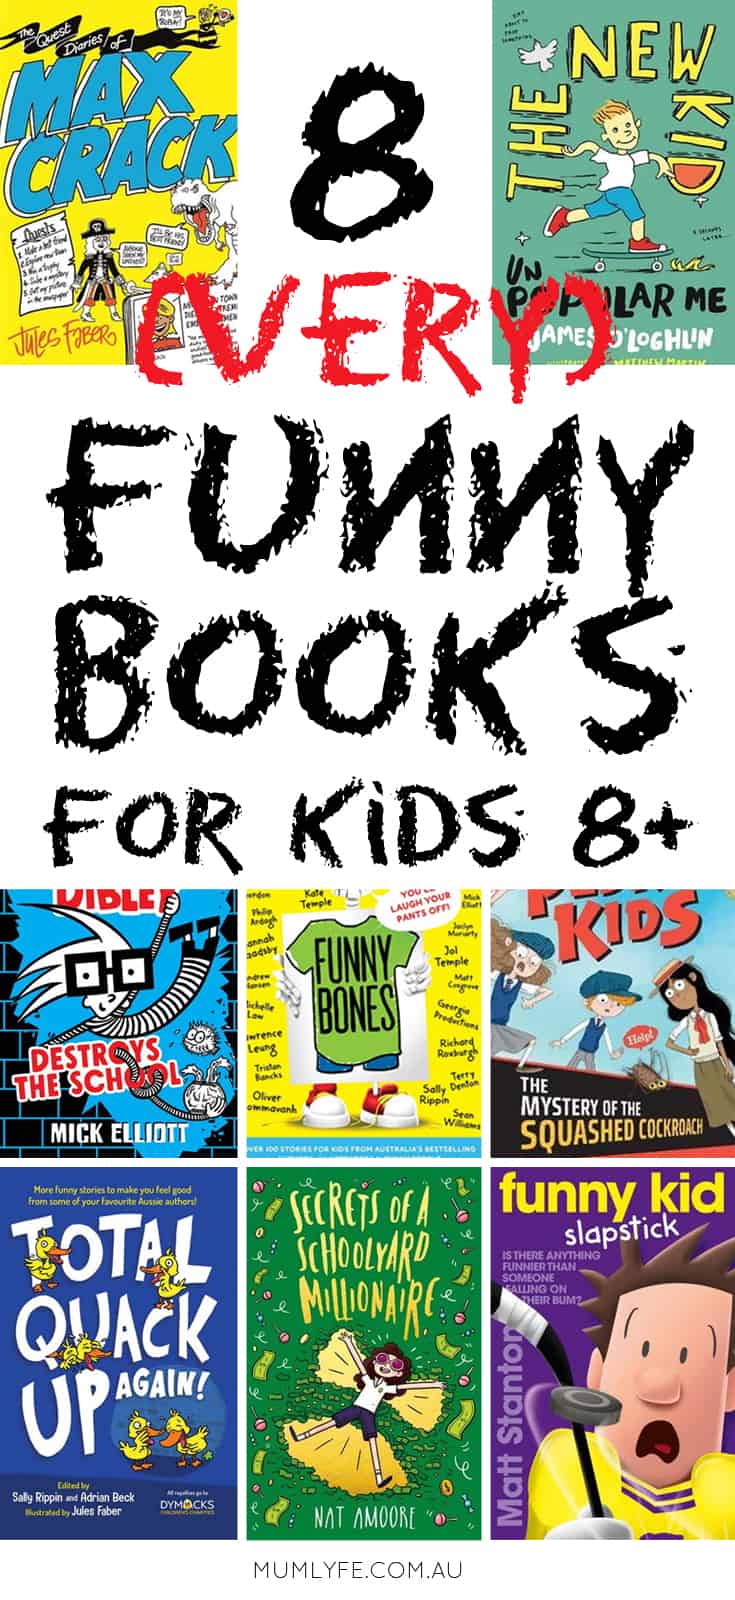 Funny books for kids: New reads for kids aged 8+ - Mumlyfe